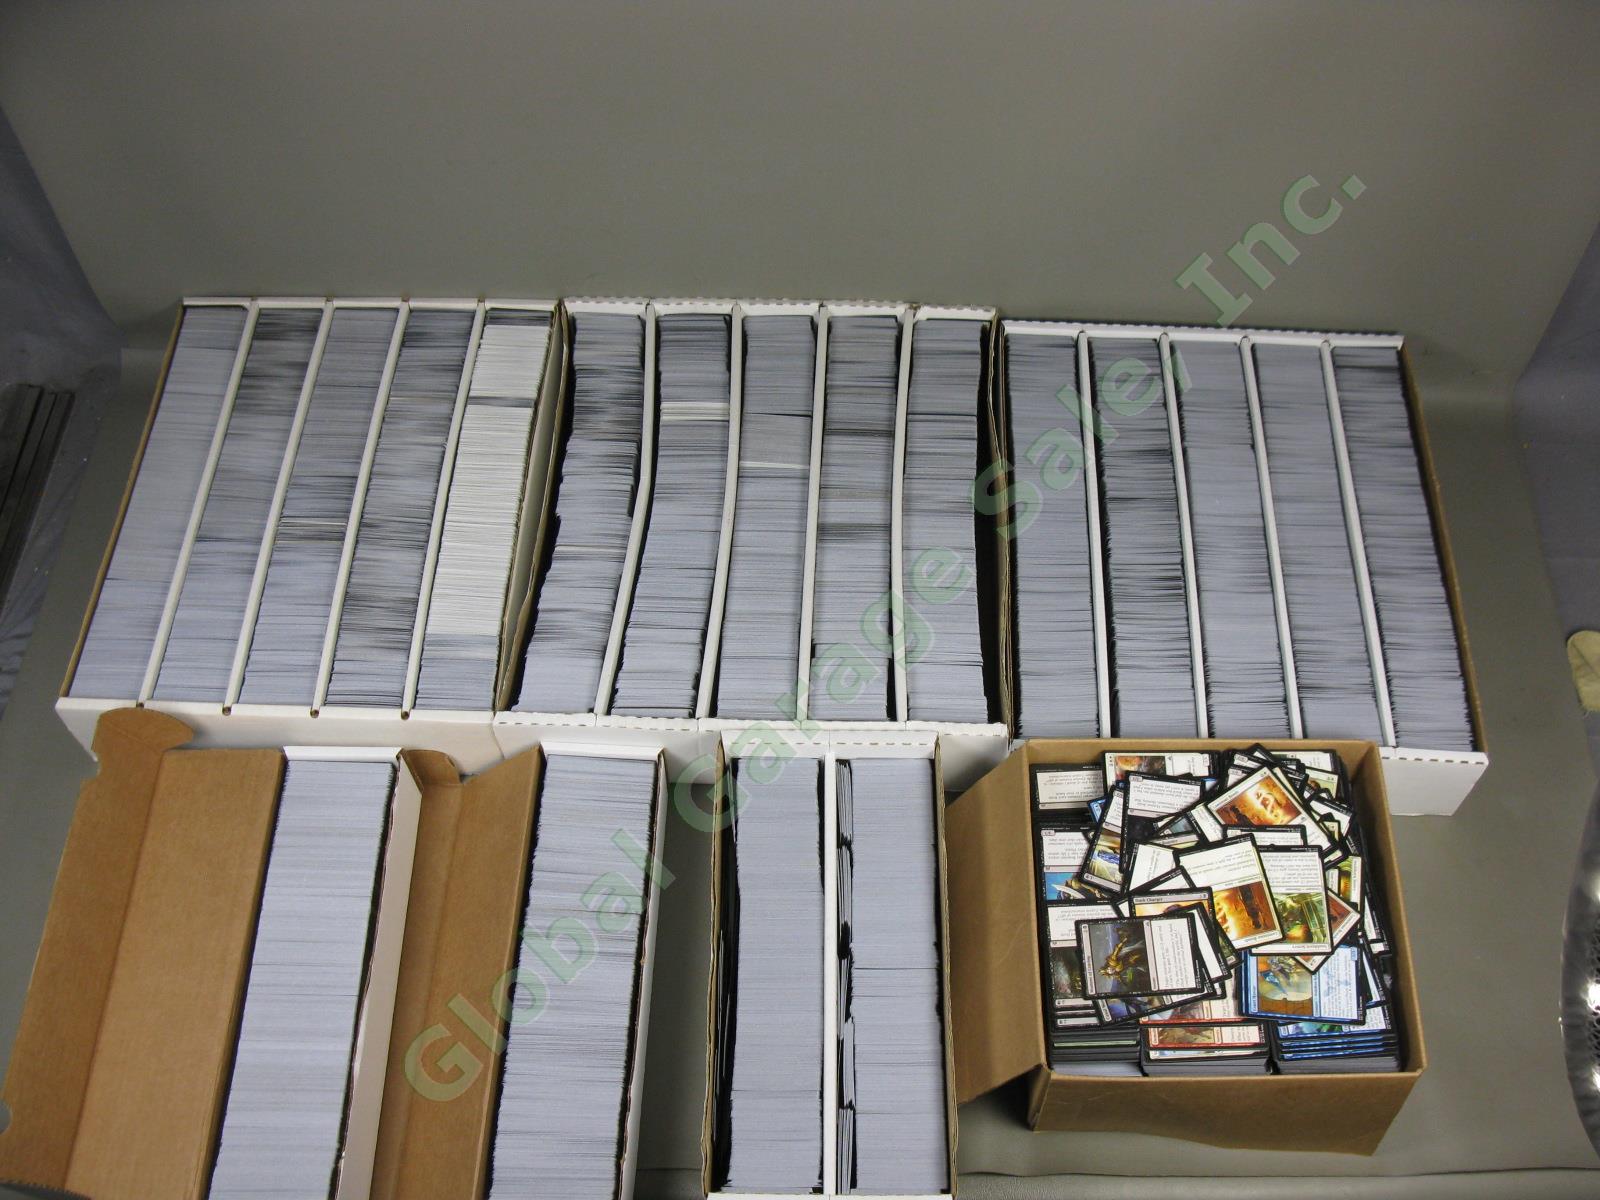 HUGE LOT ~22,000 Magic The Gathering MTG Cards Collection BIGGEST ON EBAY? Rare?